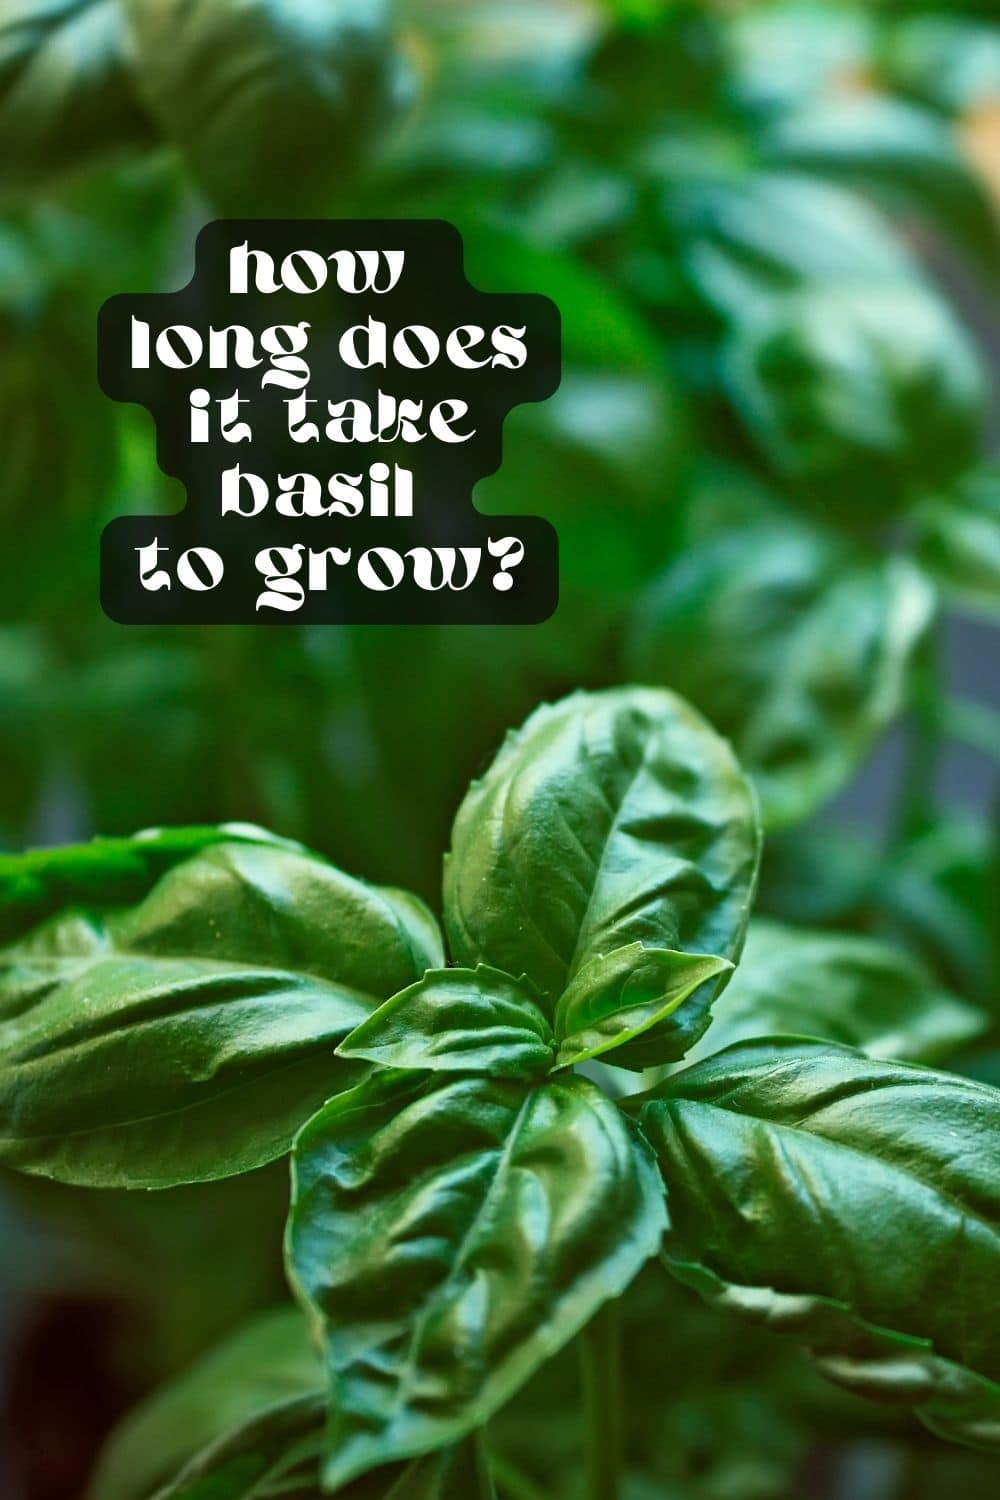 Growing herbs at home is an easy and budget-friendly way to add freshness to your meals! If you're looking to start a herb garden, basil is probably one of the first herbs you'll want to grow. It's versatile and adds a ton of flavor to many dishes. But how long does basil take to grow, and what do you need to know before planting?